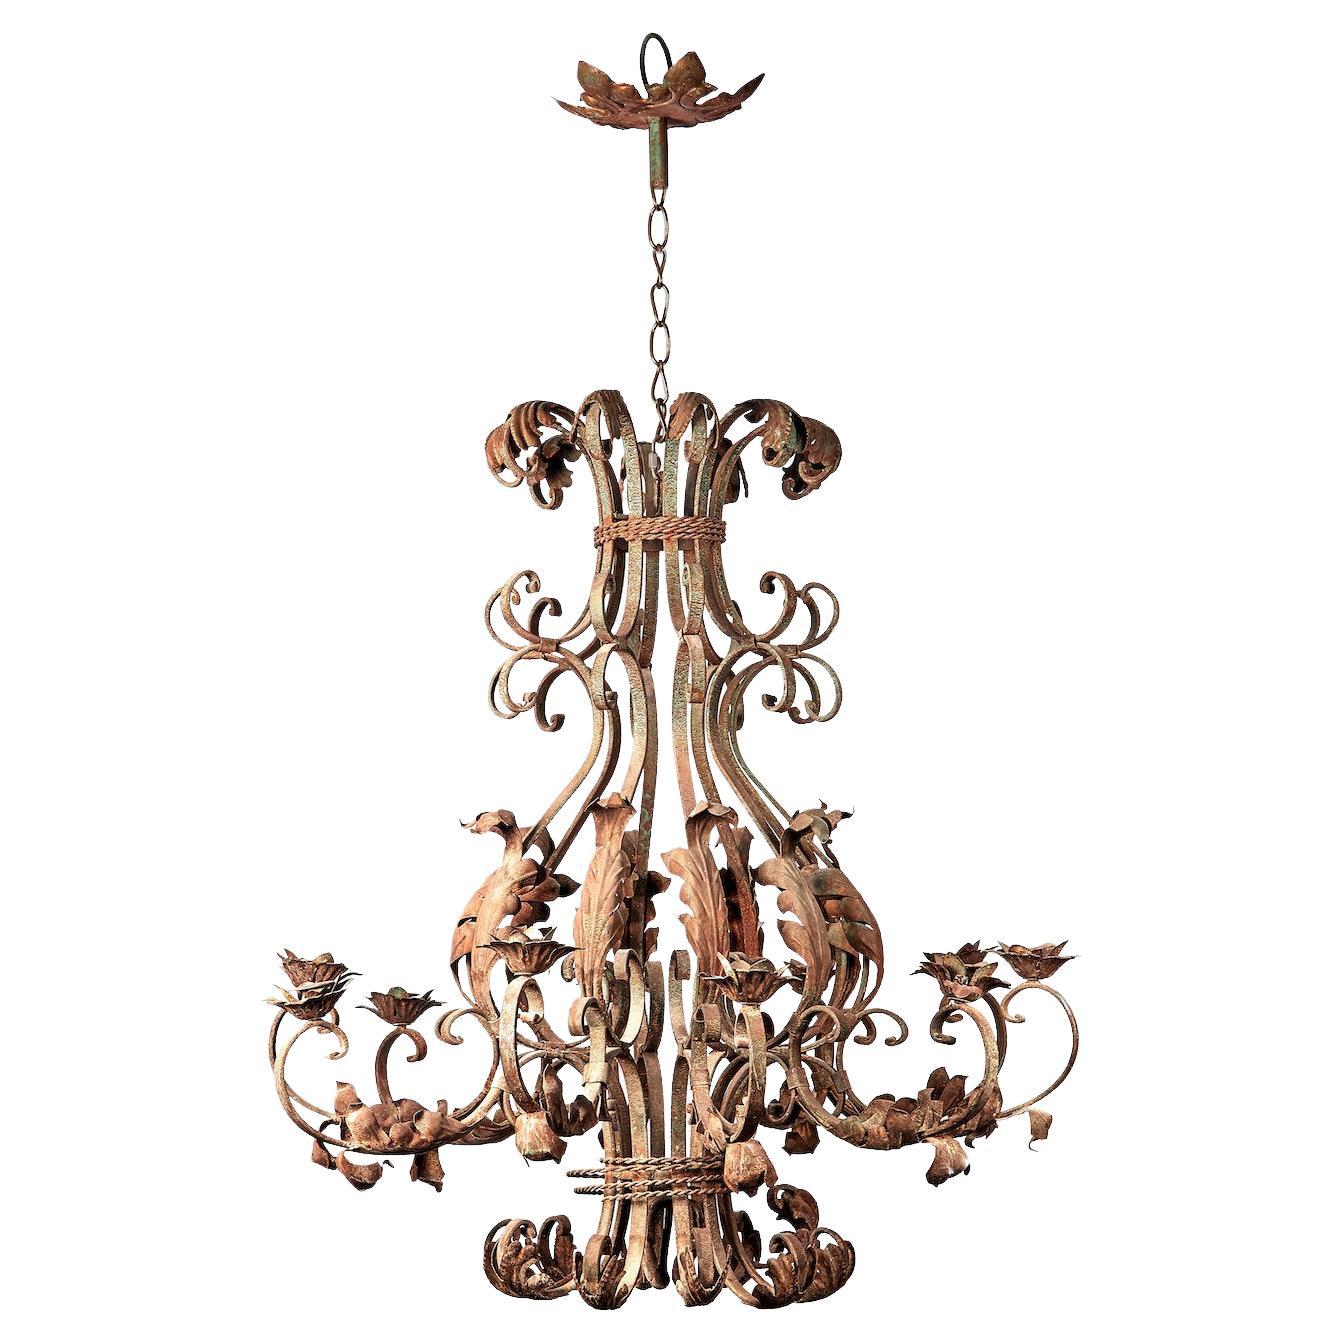 Large Ornate Ten Branch Iron Chandelier, French, circa 1930s